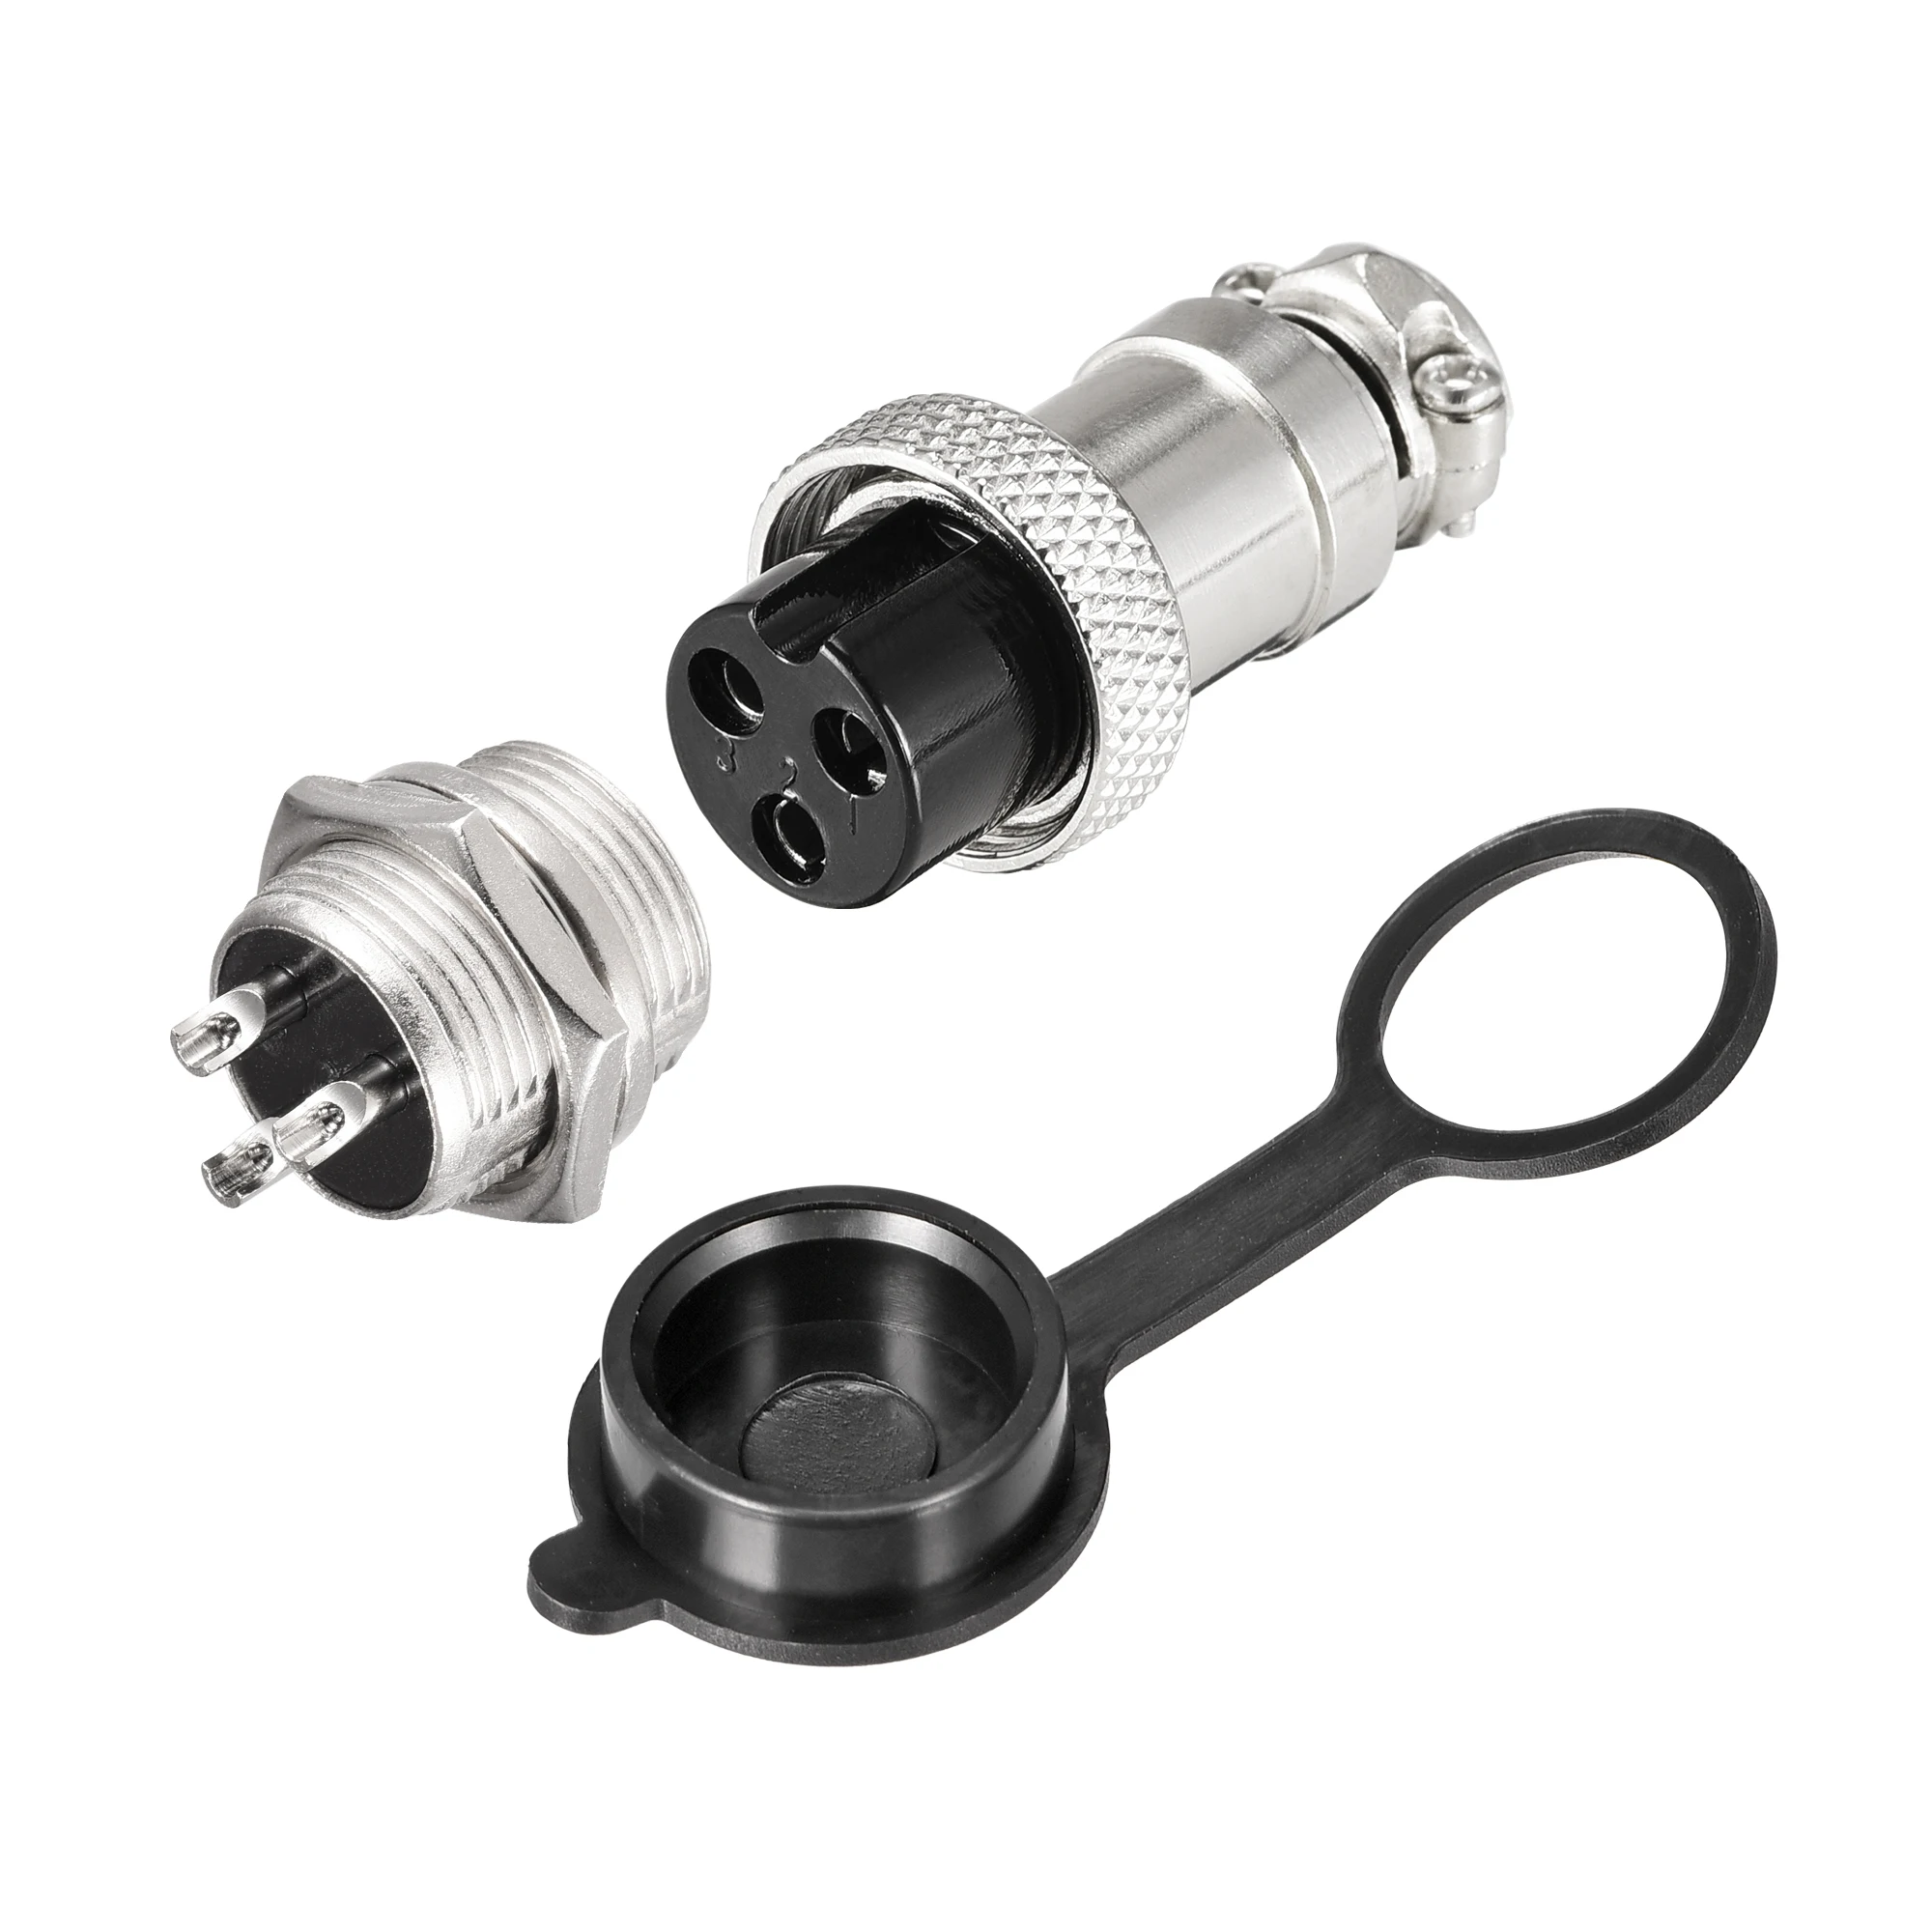 

Uxcell 16mm 3 Terminals 7A 400V GX16 Aviation Connector with Plug Cover 2 Set